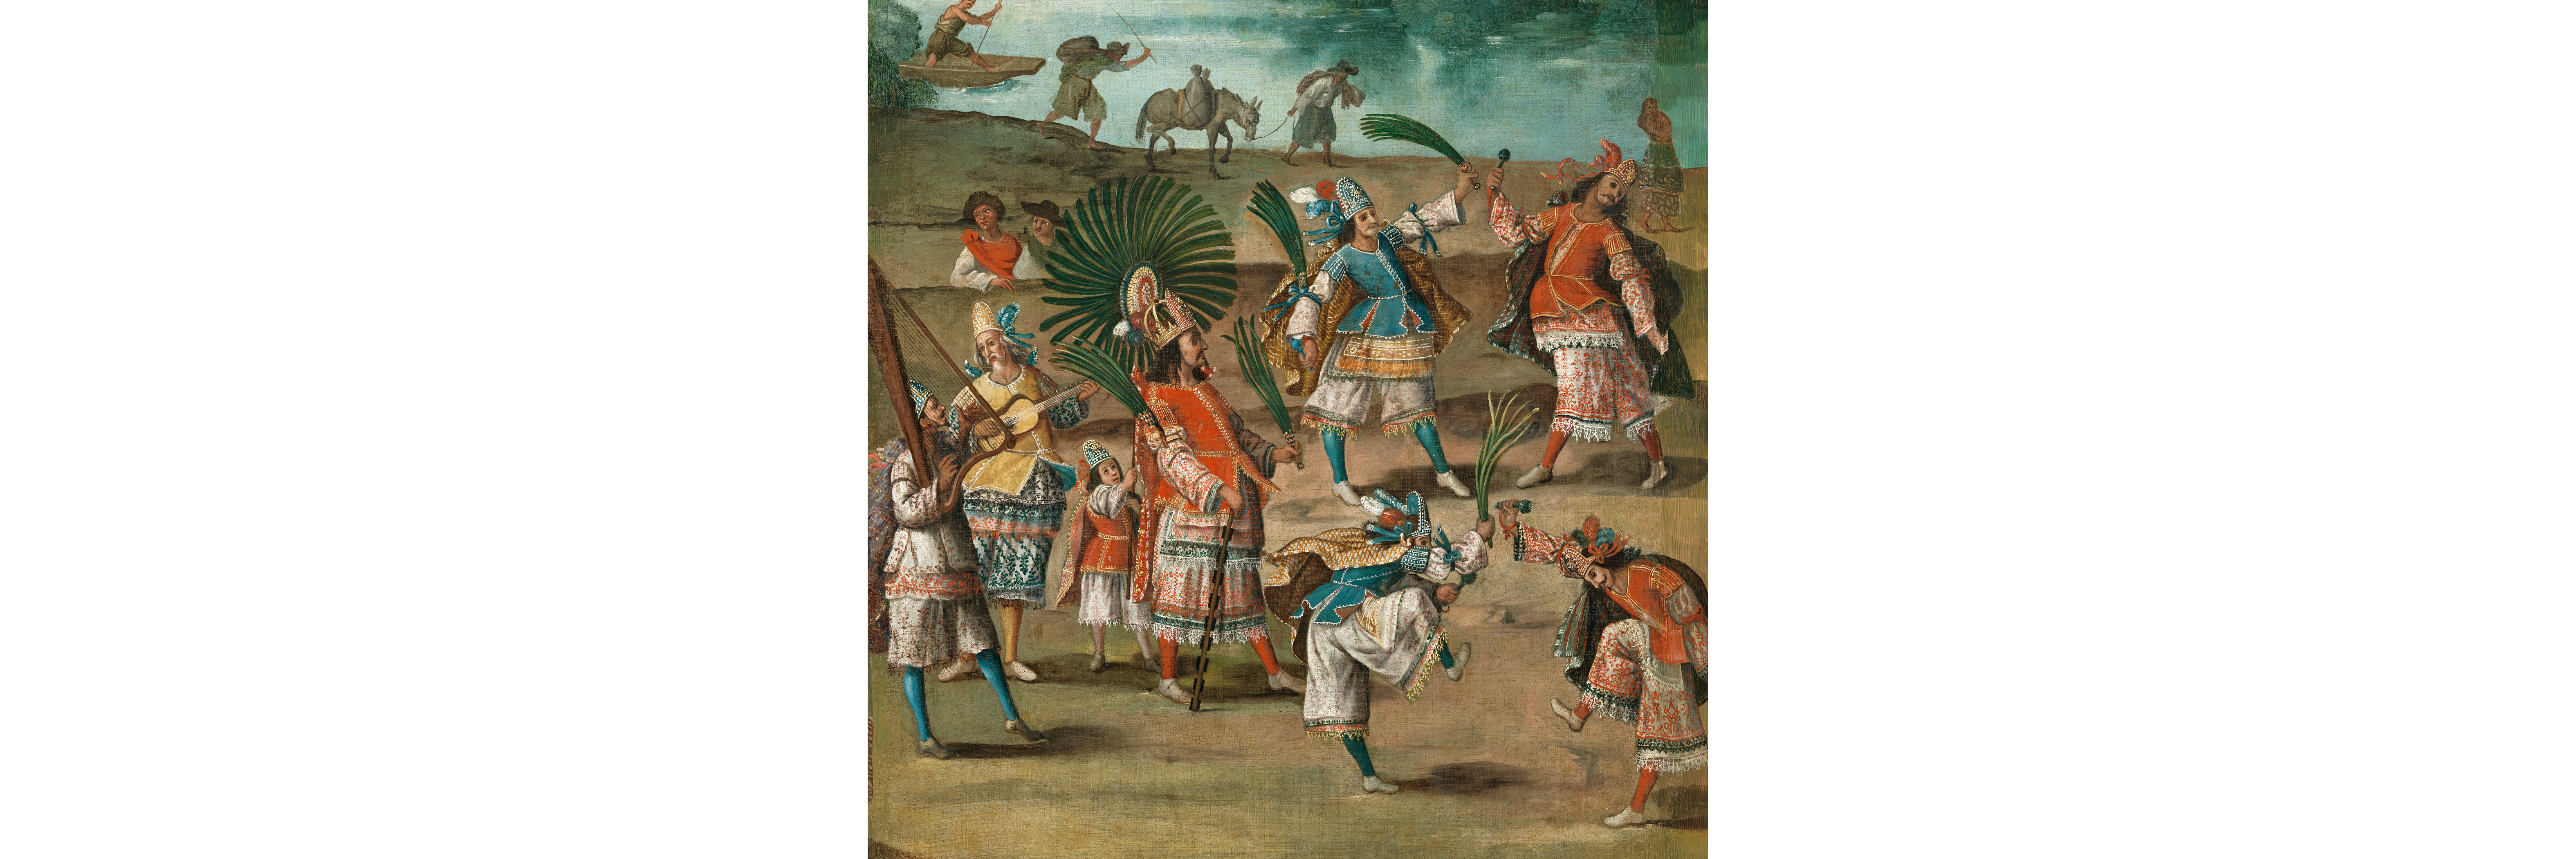 Unidentified artist, Folding Screen with Indian Wedding, Mitote, and Flying Pole (Biombo con desposorio indígena, mitote y palo volador) (detail), Mexico, c. 1660–90, Los Angeles County Museum of Art, Purchased with funds provided by the Bernard and Edith Lewin Collection of Mexican Art Deaccession Fund, photo © Museum Associates/ LACMA